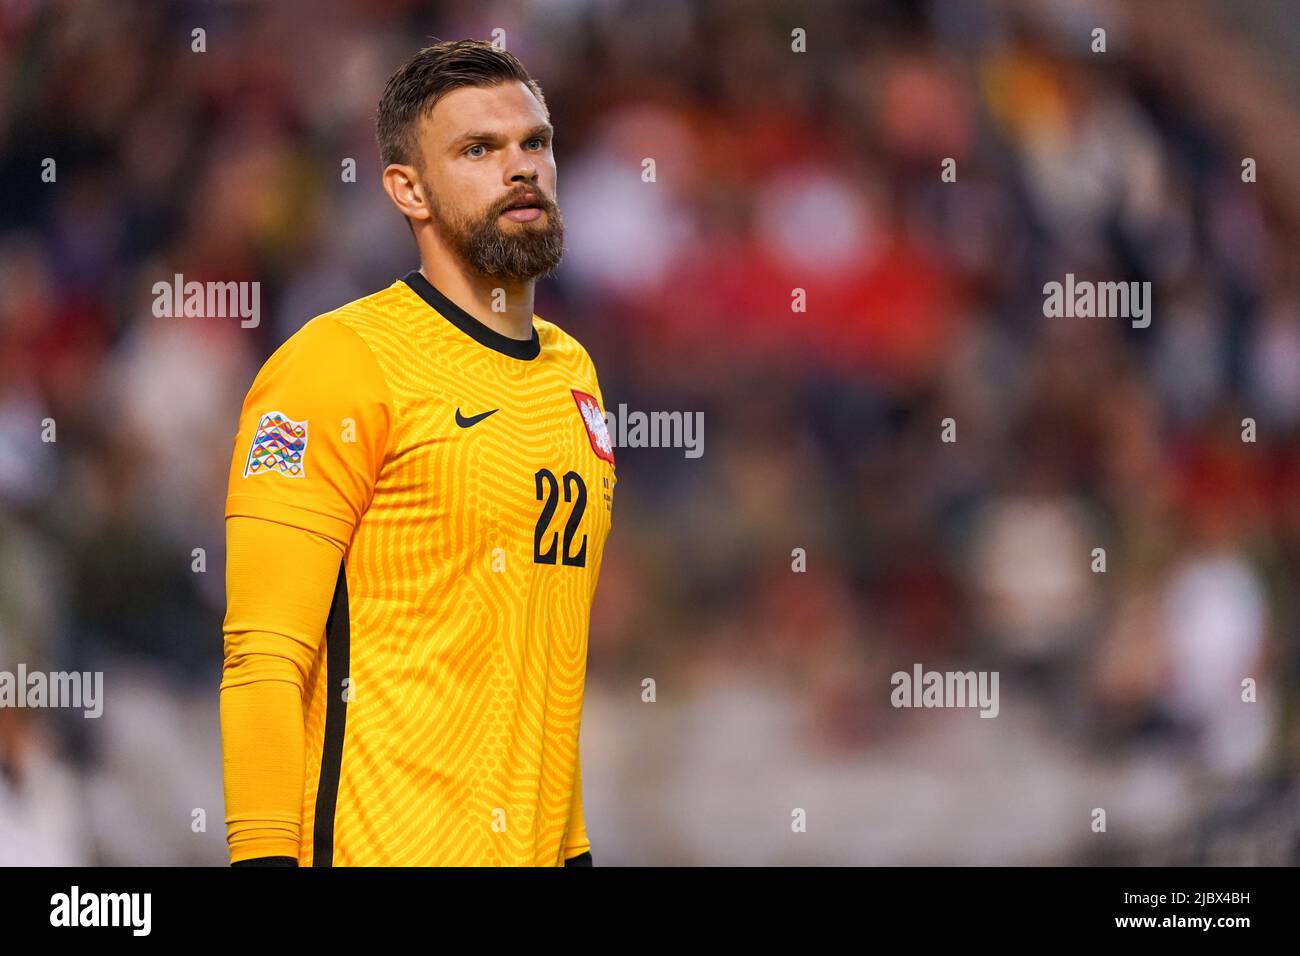 BRUSSELS, BELGIUM - JUNE 8: goalkeeper Bartlomiej Dragowski of Poland during the UEFA Nations League A Group 4 match between the Belgium and Poland at the Stade Roi Baudouin on June 8, 2022 in Brussels, Belgium (Photo by Joris Verwijst/Orange Pictures) Stock Photo